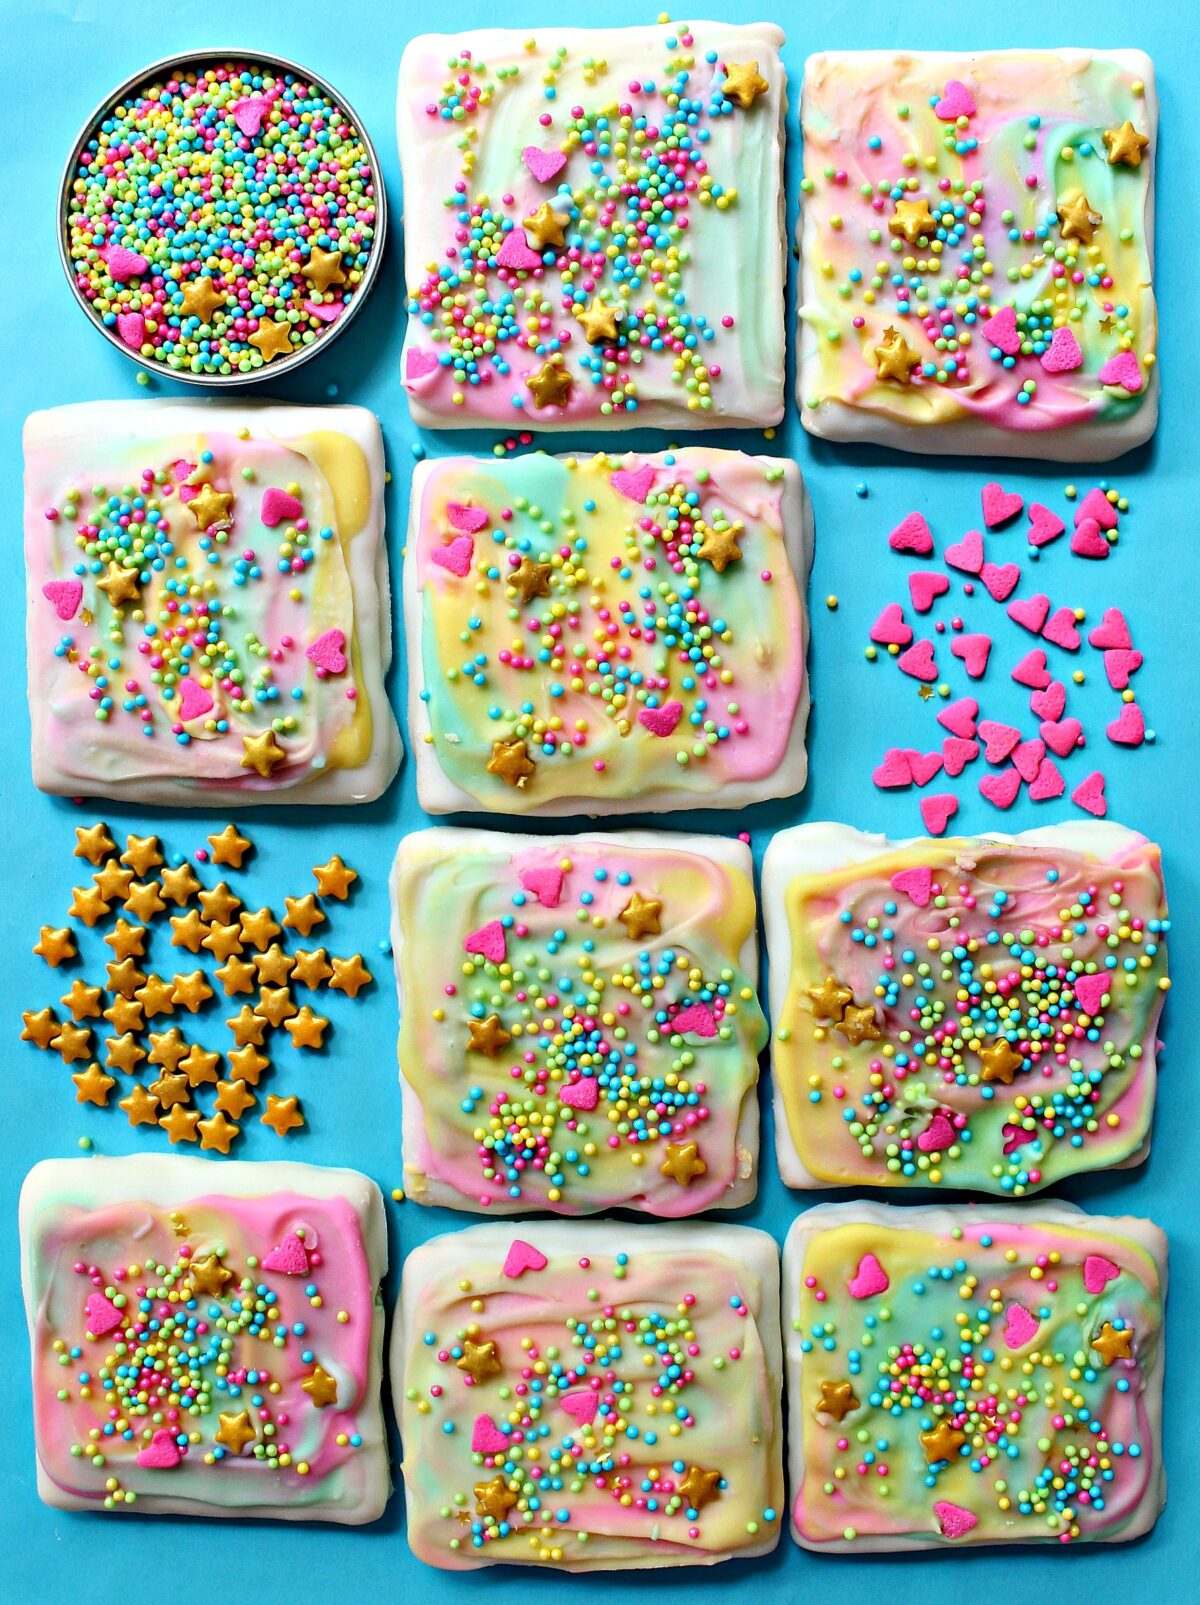 Unicorn Graham Crackers are square grahams topped with colorful white chocolate swirls and sprinkles.